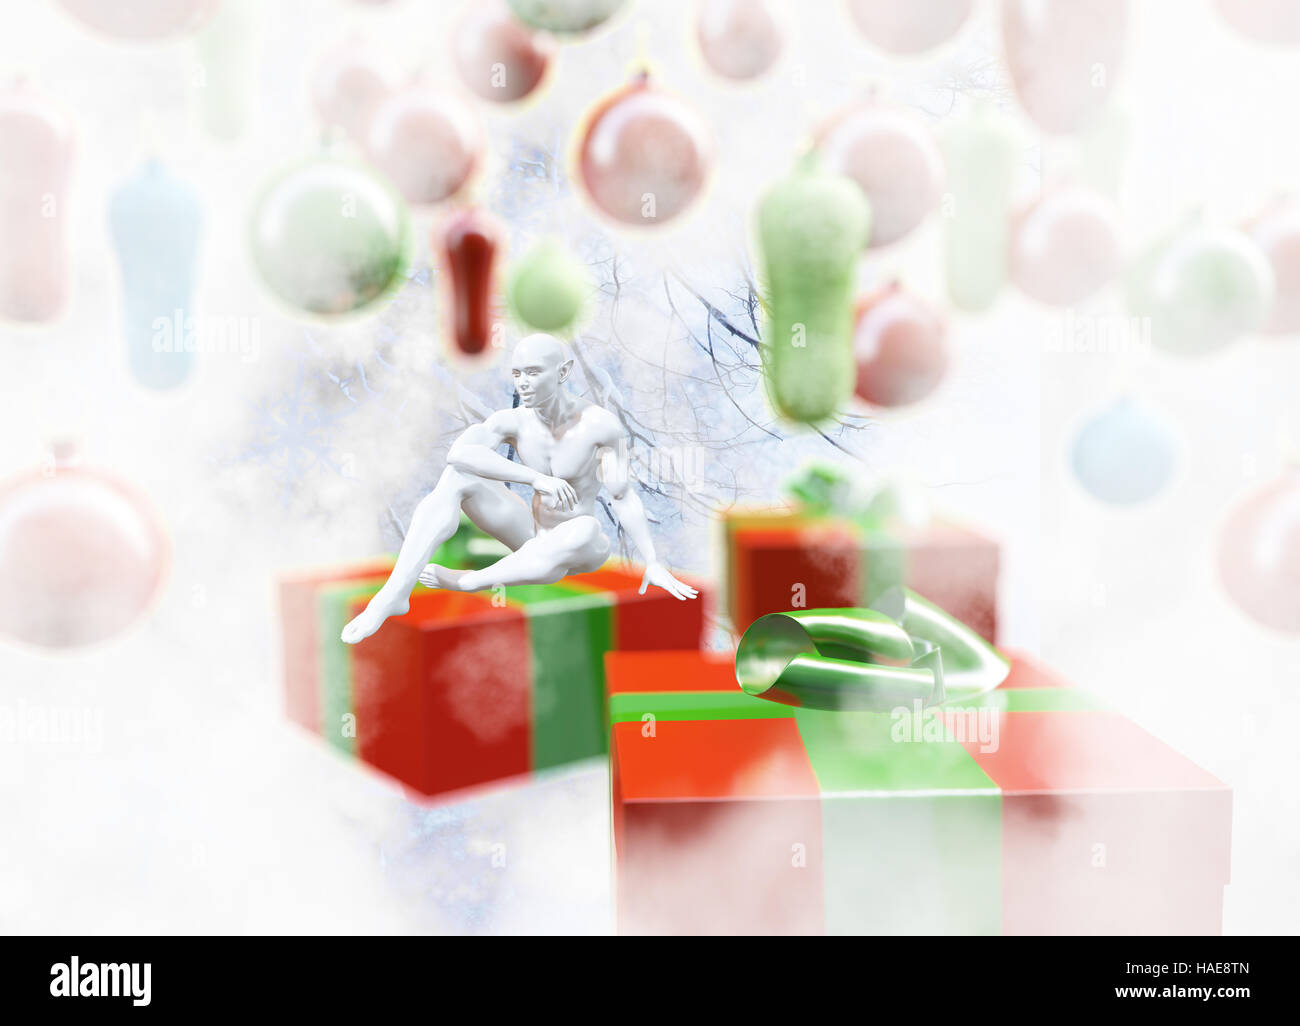 Christmas New Year colorful red and green gift boxes with bows of ribbons and sitting man elf figure on background of colorful balls decorations . Gre Stock Photo